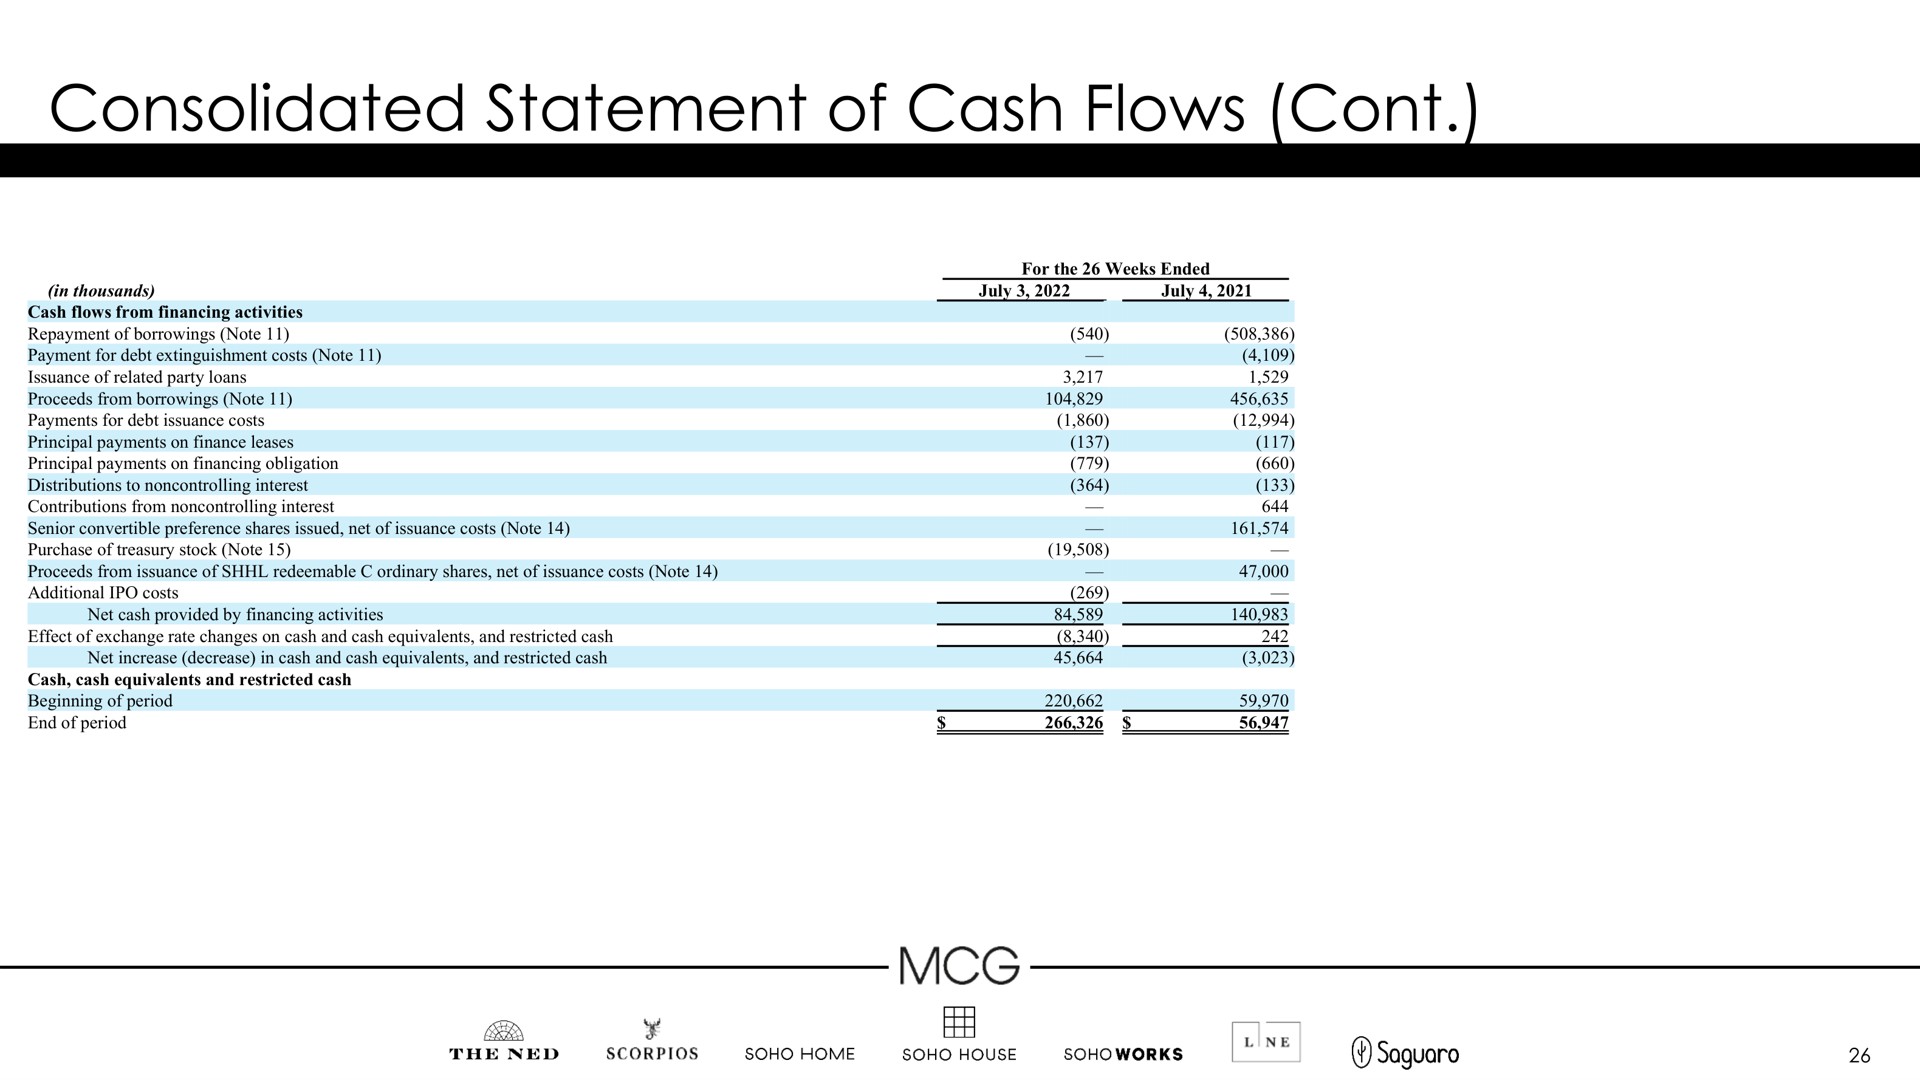 consolidated statement of cash flows by | Membership Collective Group